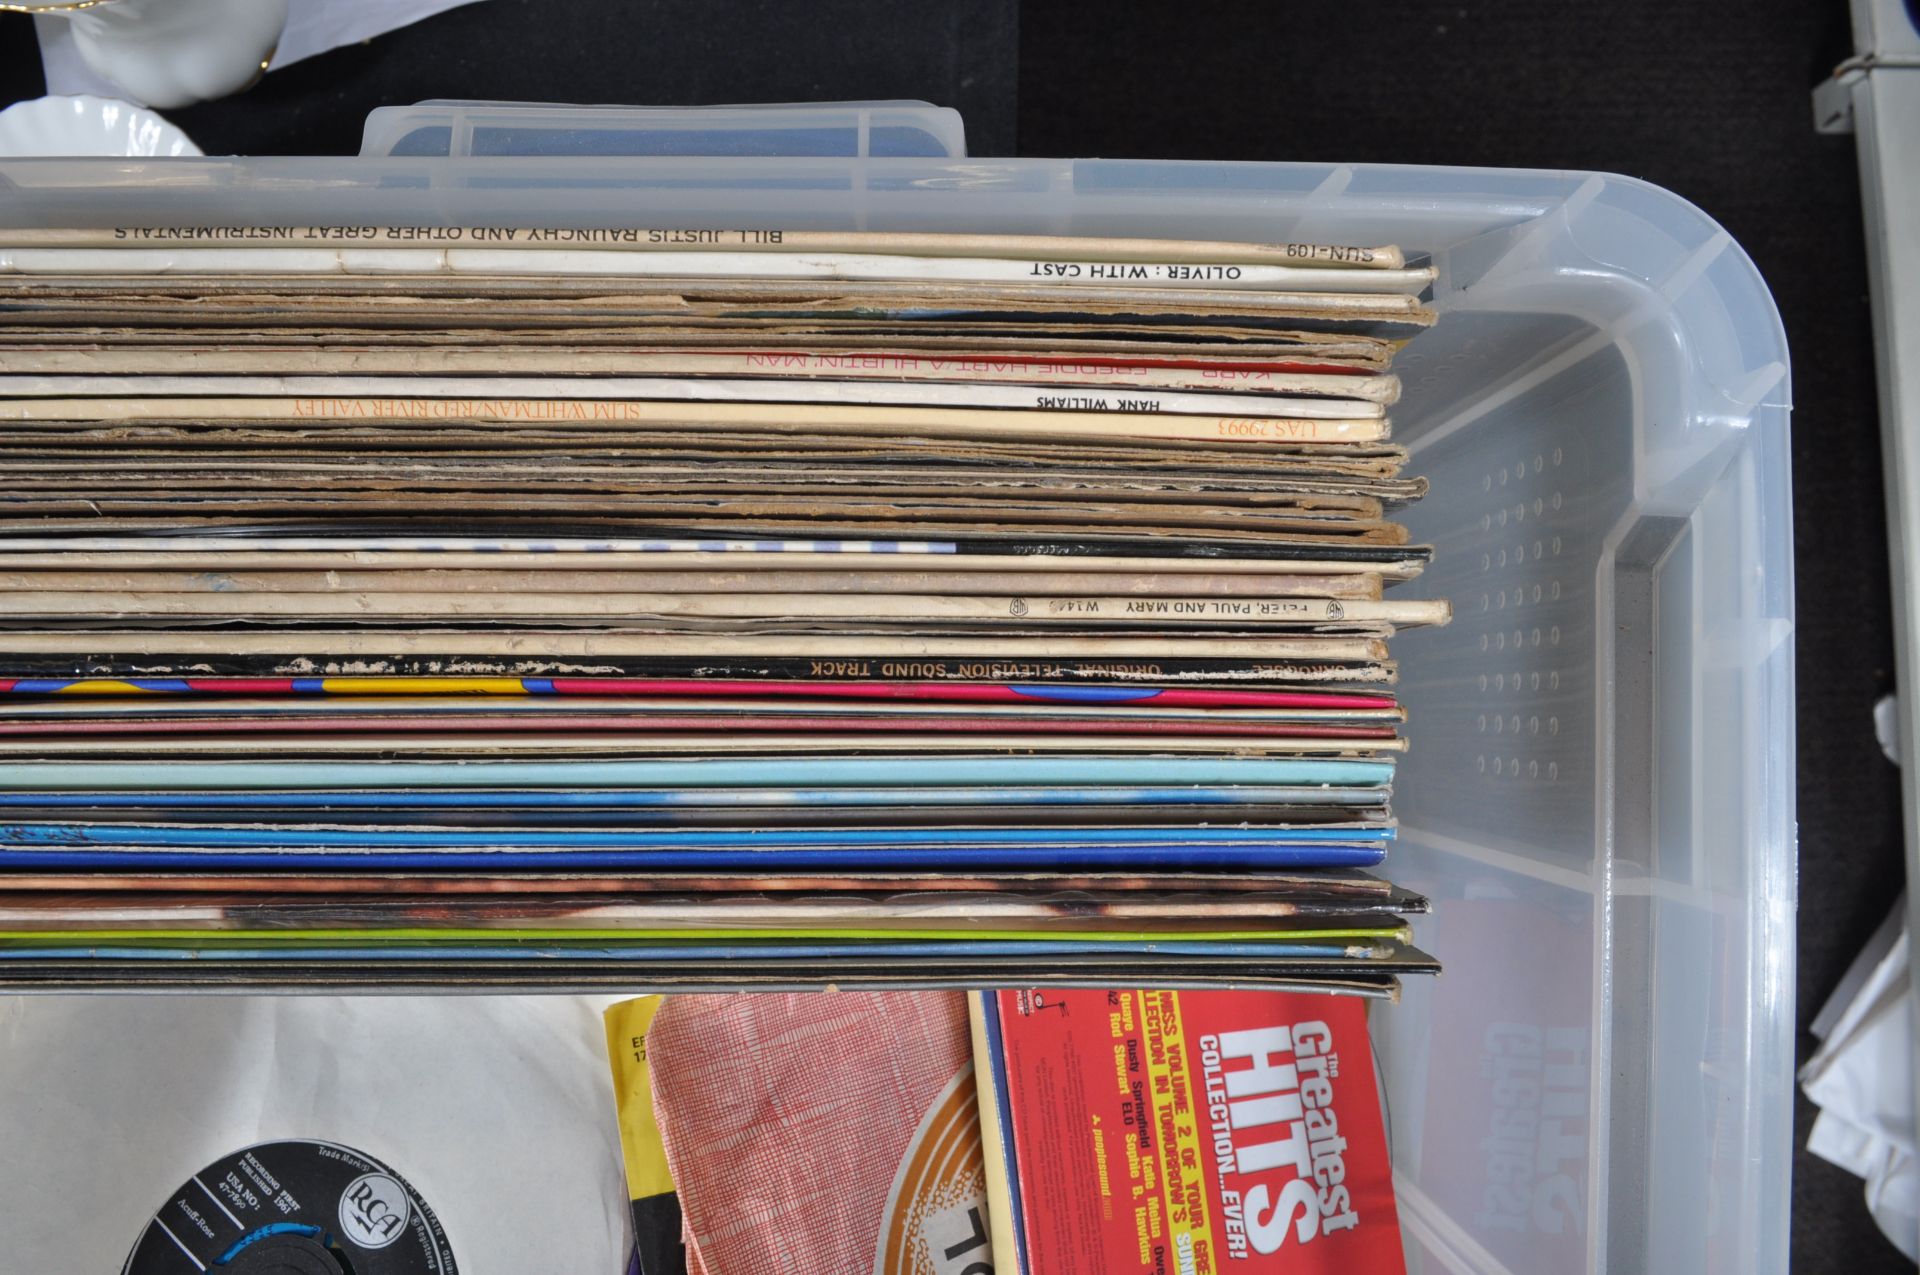 LARGE COLLECTION OF LP’S VINYL 45RPM RECORDS - Image 5 of 6